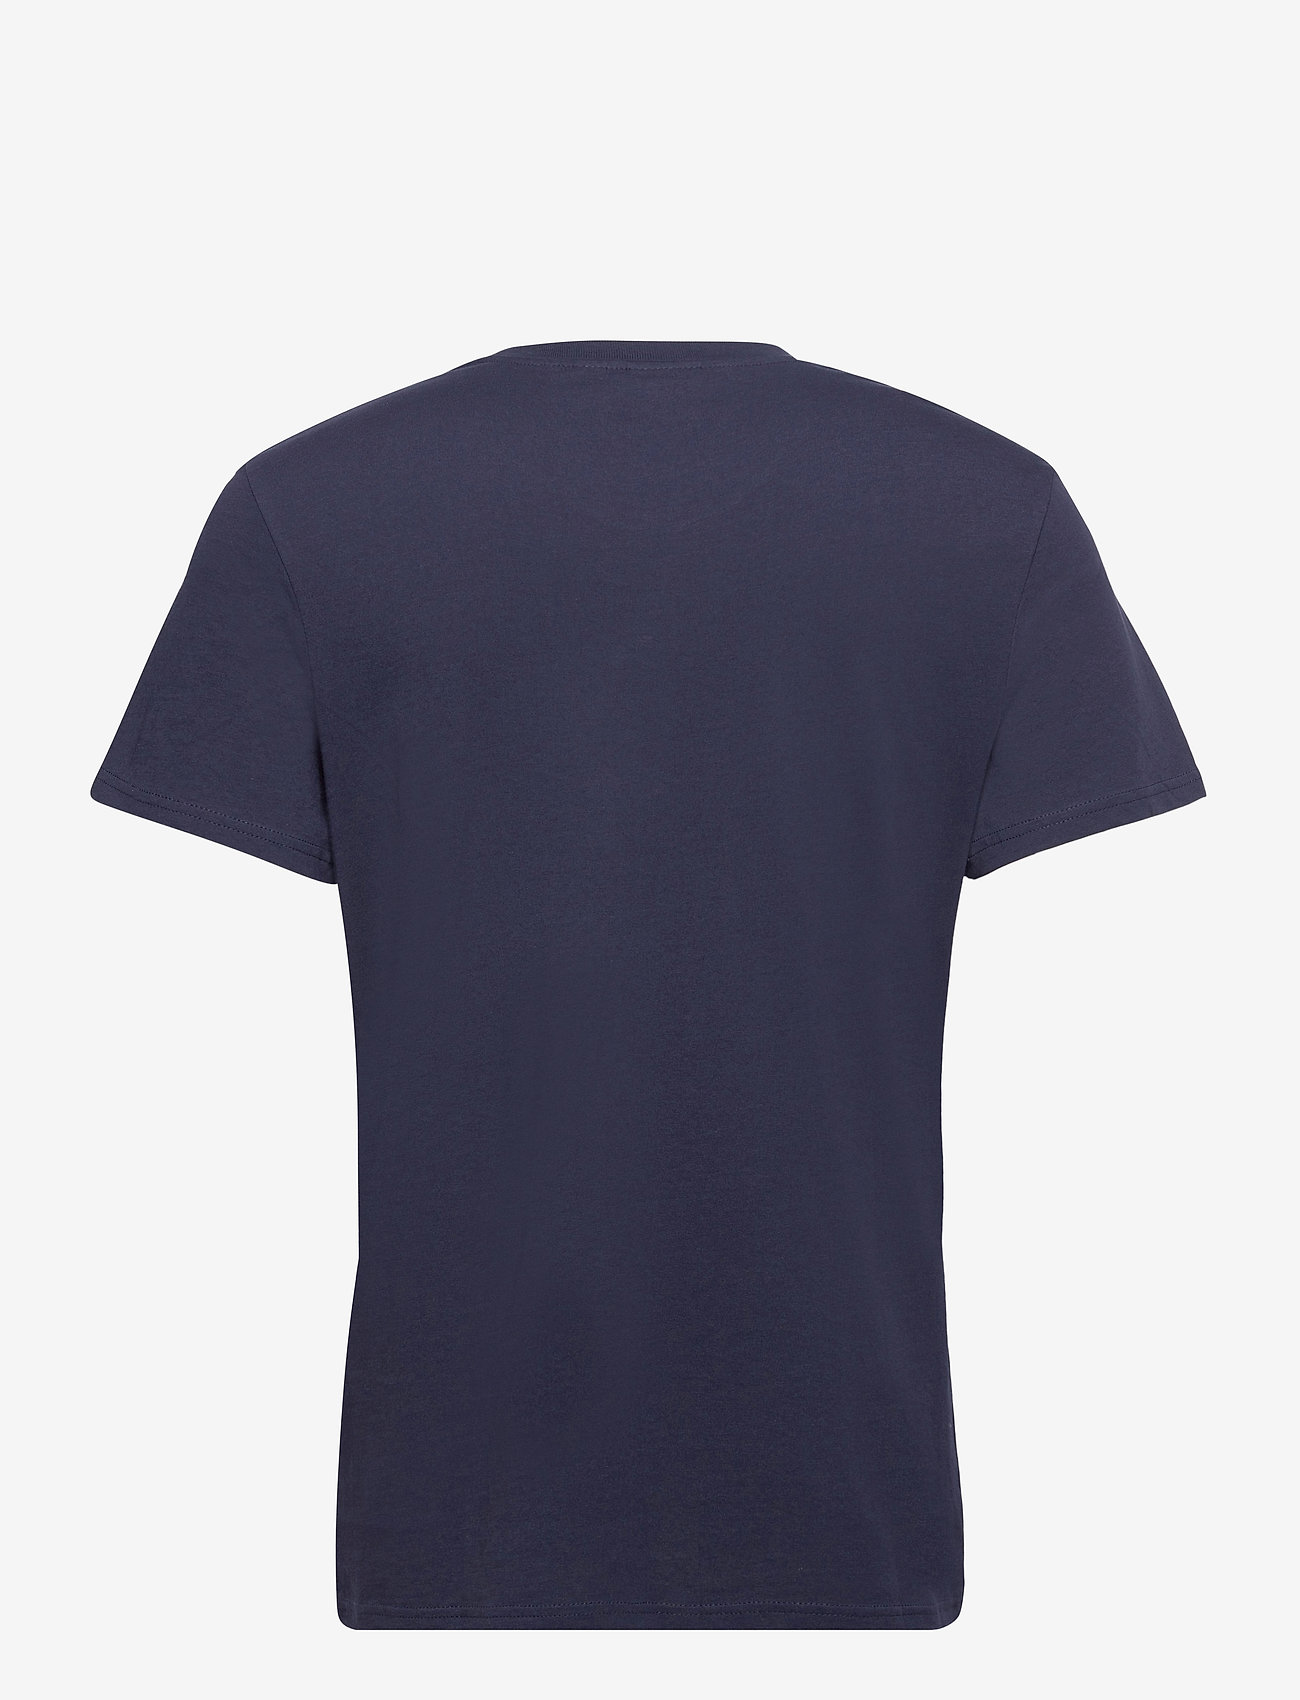 G-Star RAW - Graphic 8 r t s\s - short-sleeved t-shirts - sartho blue - 1